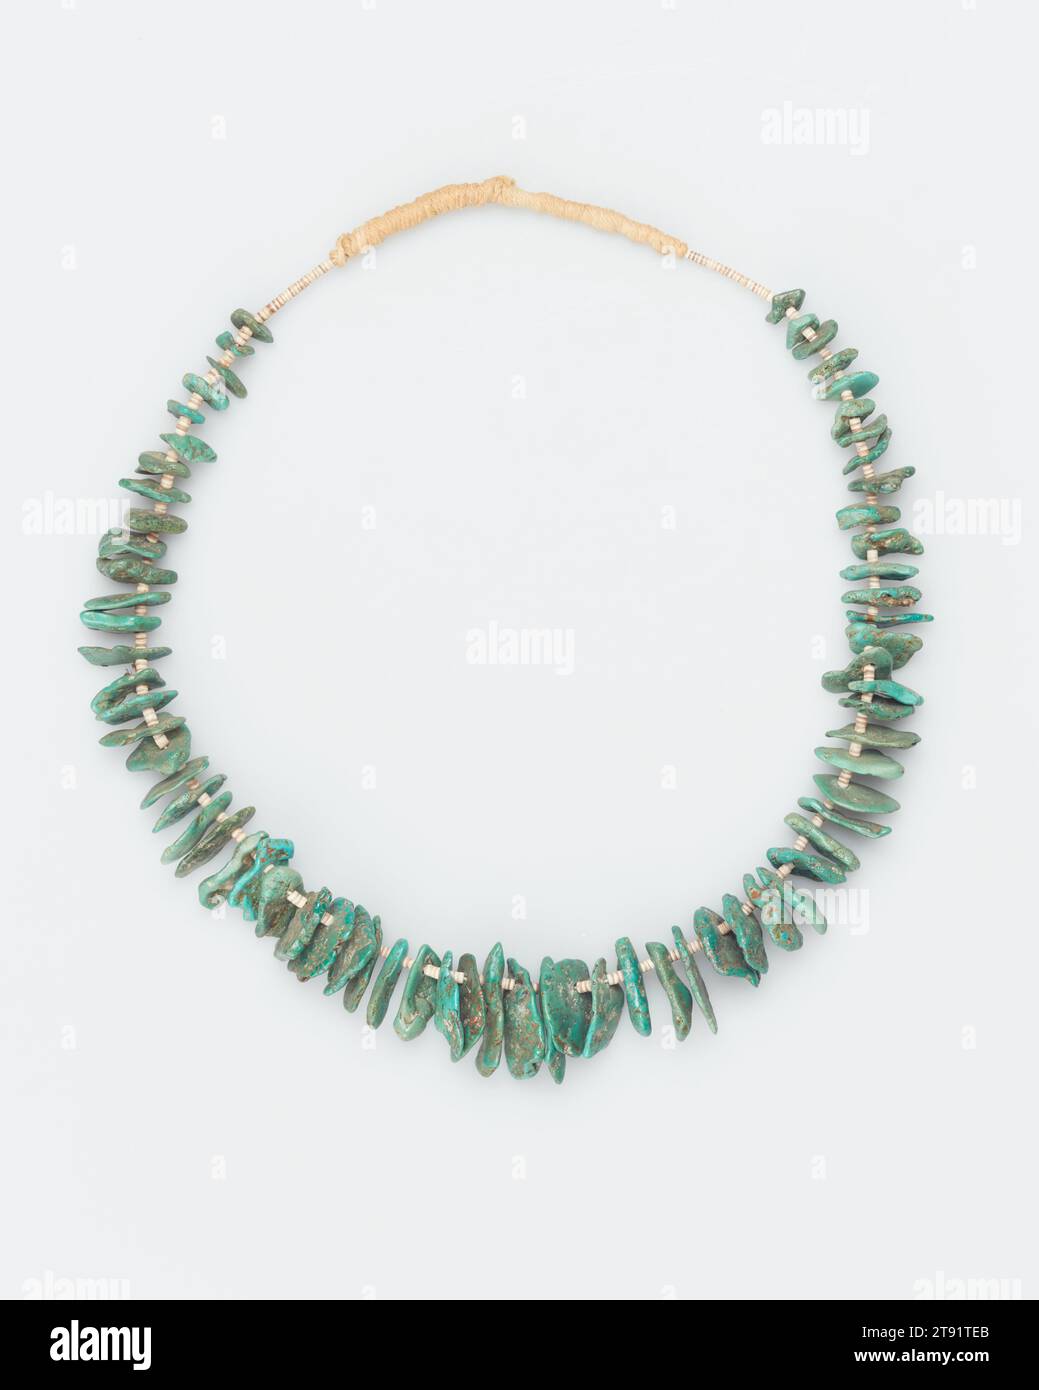 Necklace, 14 in. (35.56 cm), Turquoise, heishi, United States Stock Photo